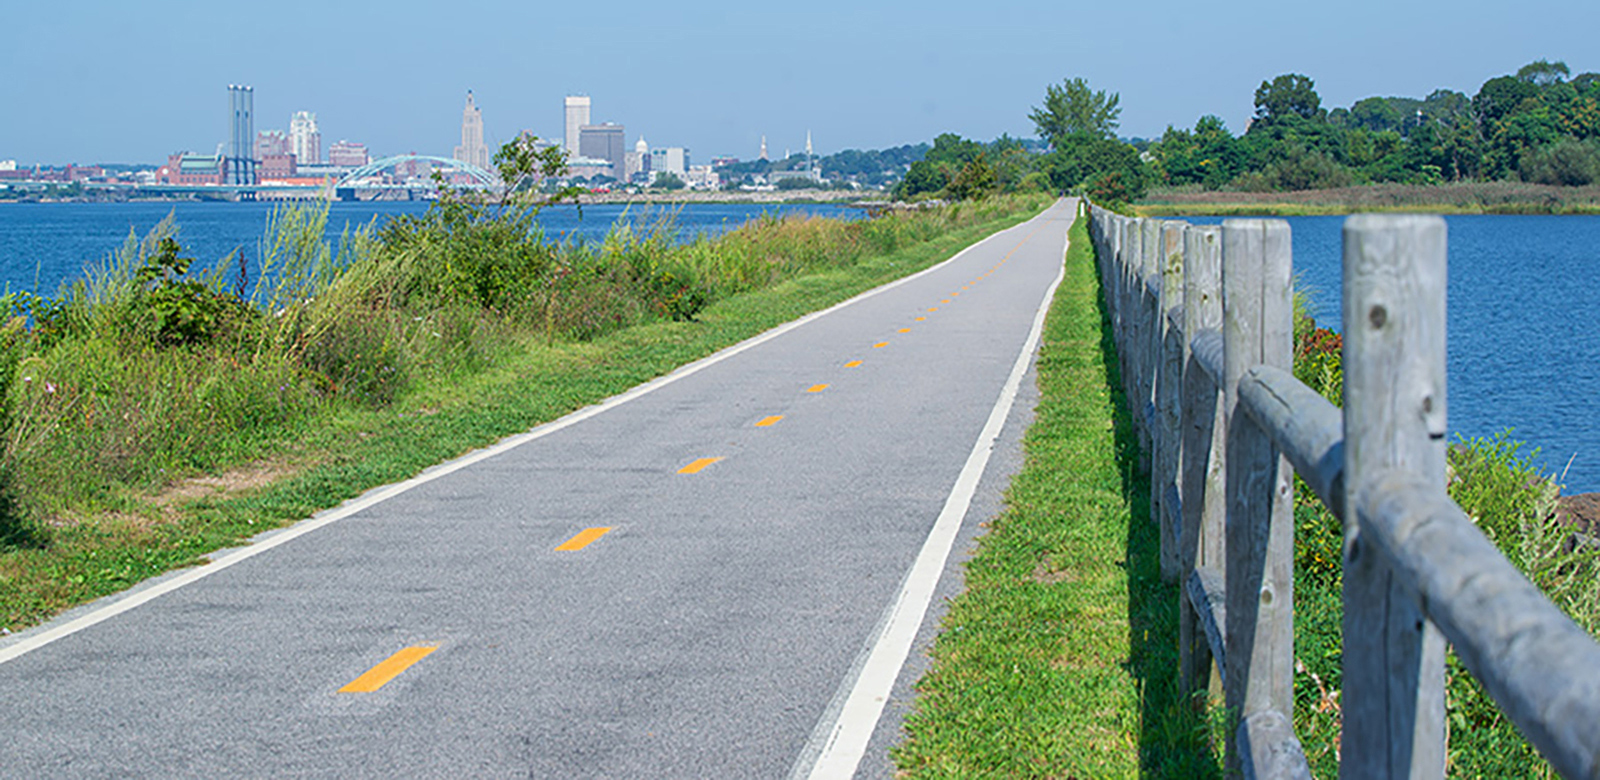 For East Bay Bike Path commuter Tiffany Rhodes, this section of the path in East Providence is her favorite. (Joanna Detz/ecoRI News)